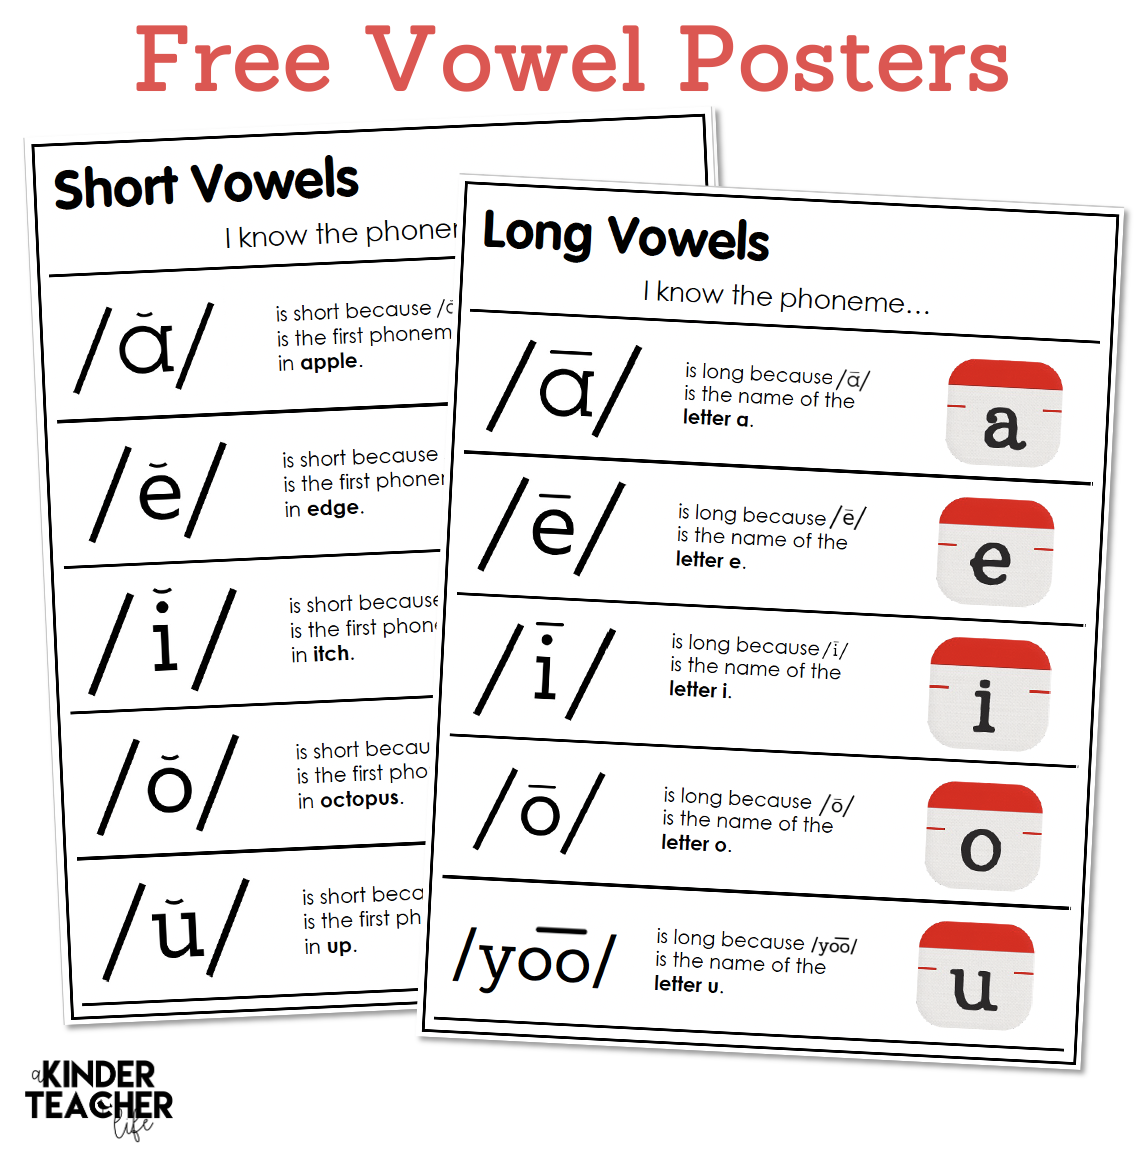 Why You Should Use Vowel Posters In Your Classroom